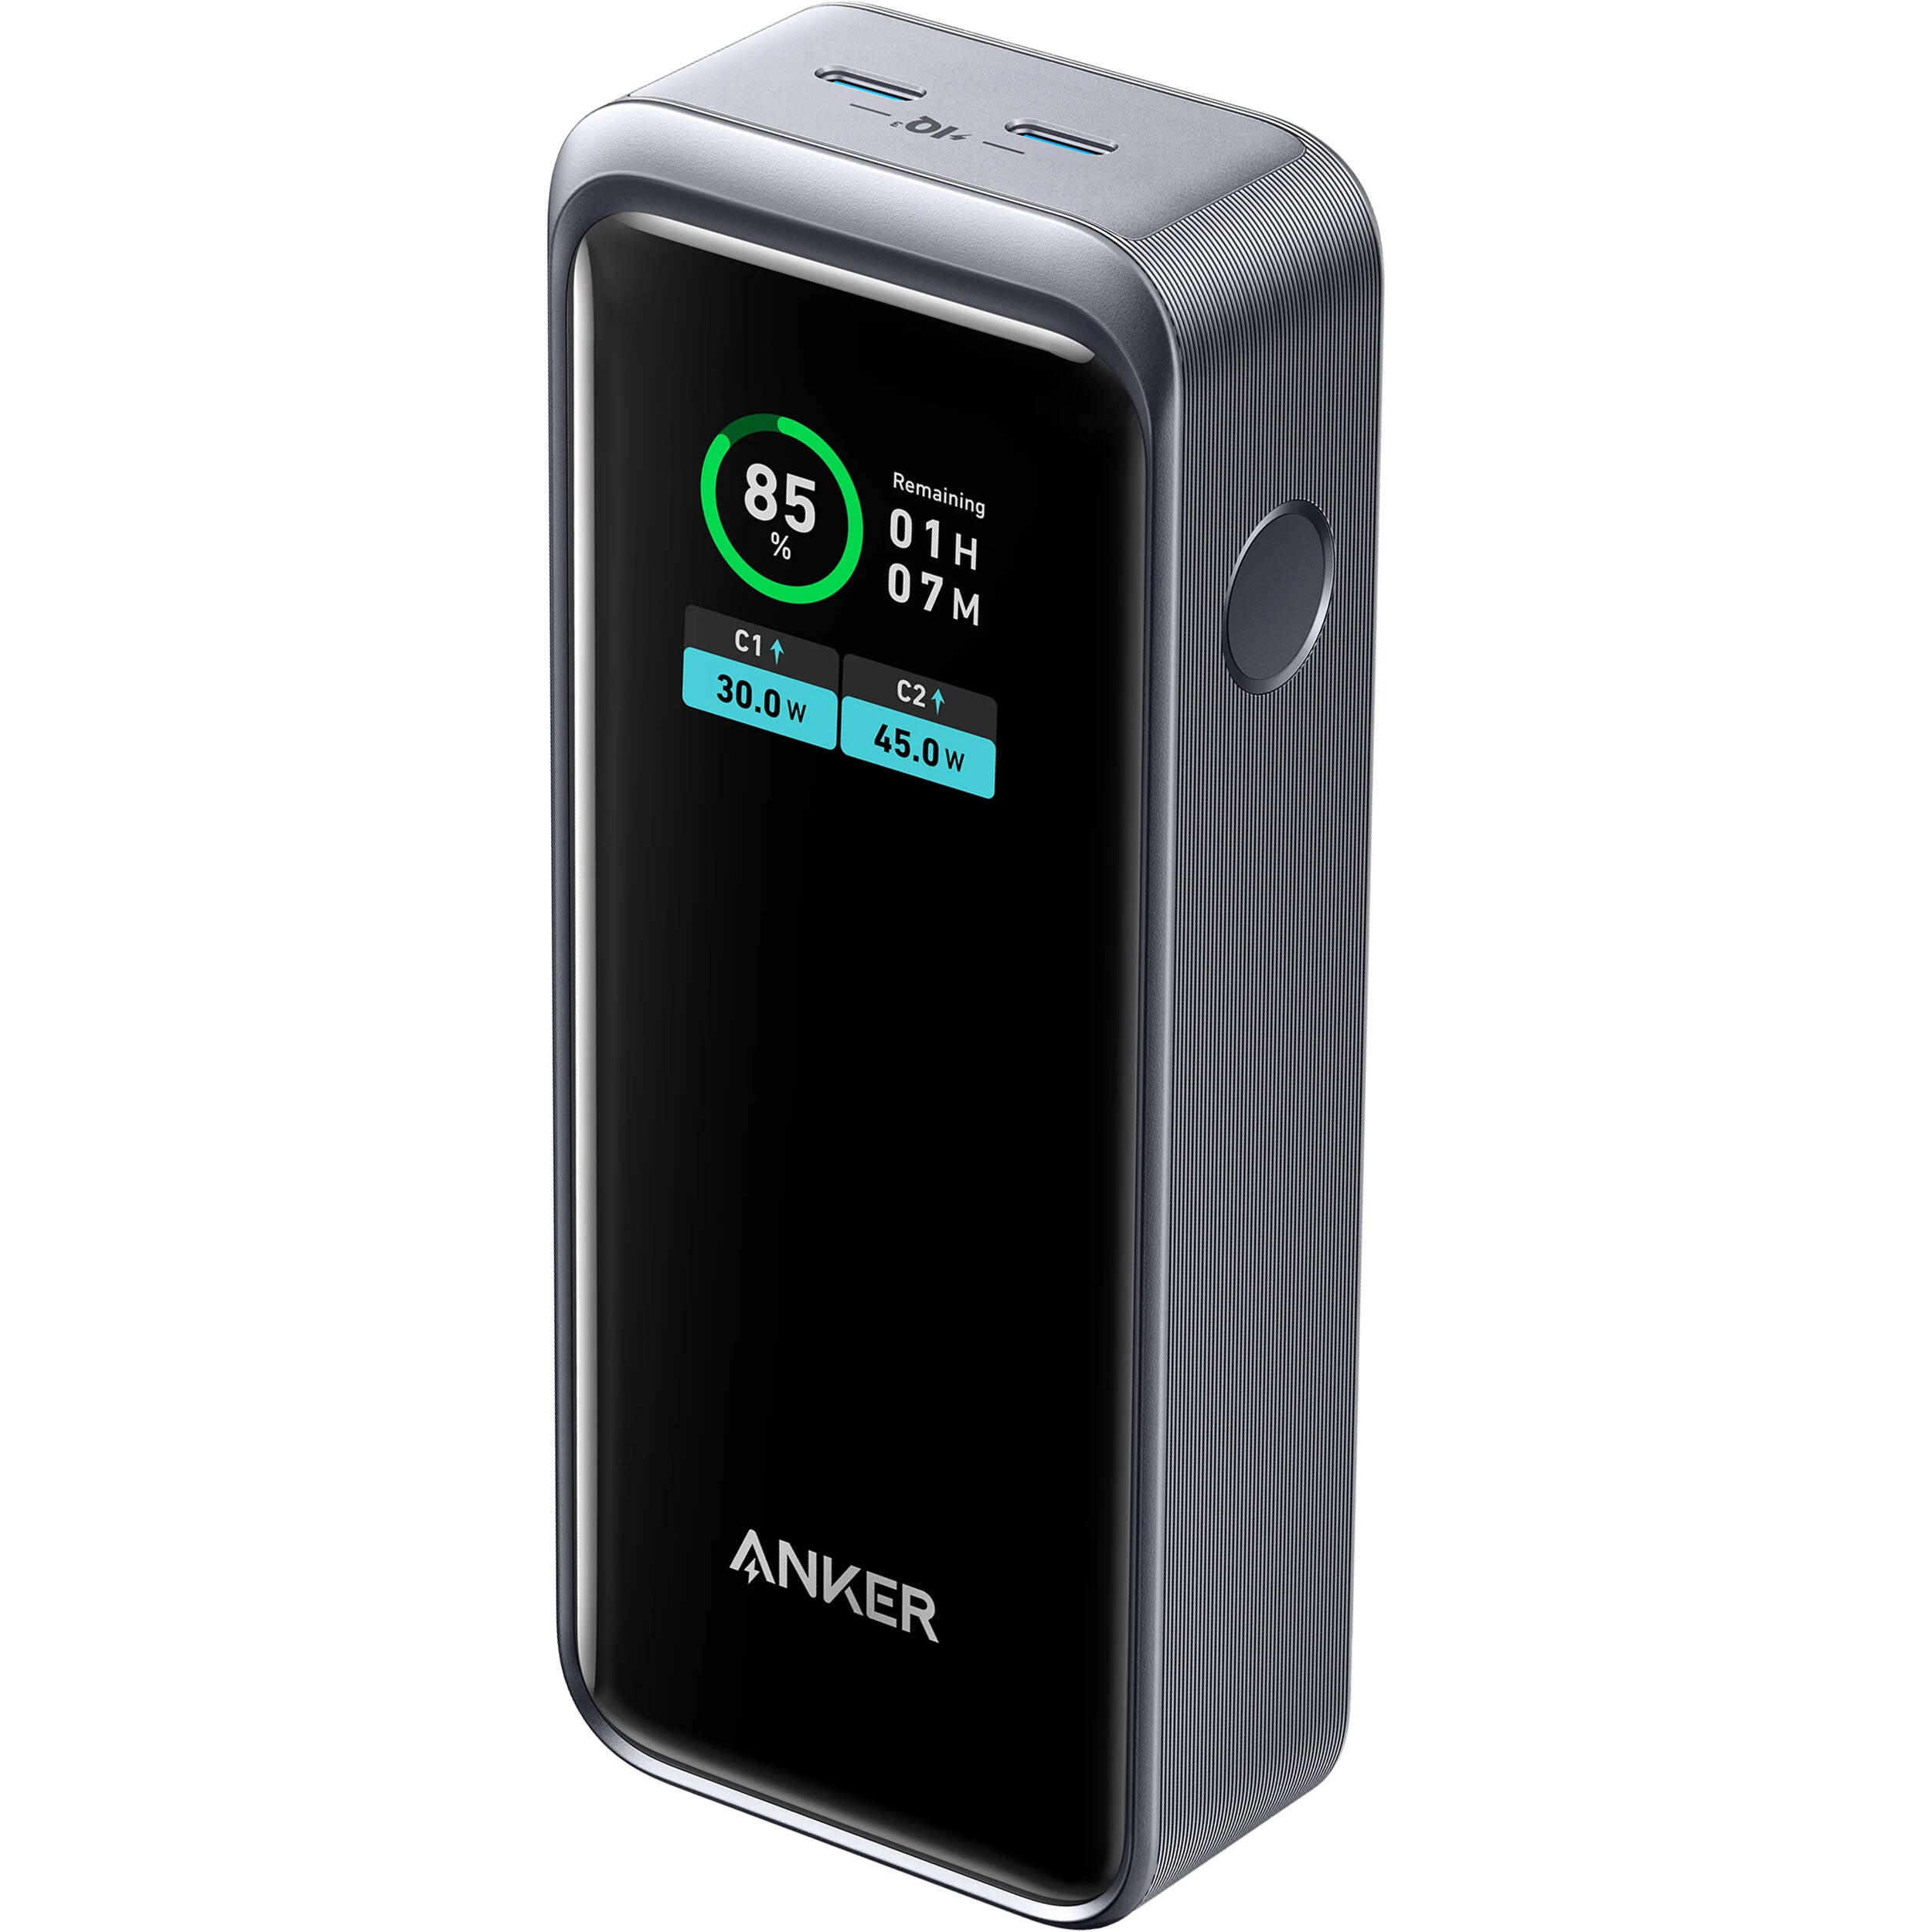 Anker Prime Power Bank, 2-Port (130W) Power Bank with LCD Screen 12,000mAh - Black